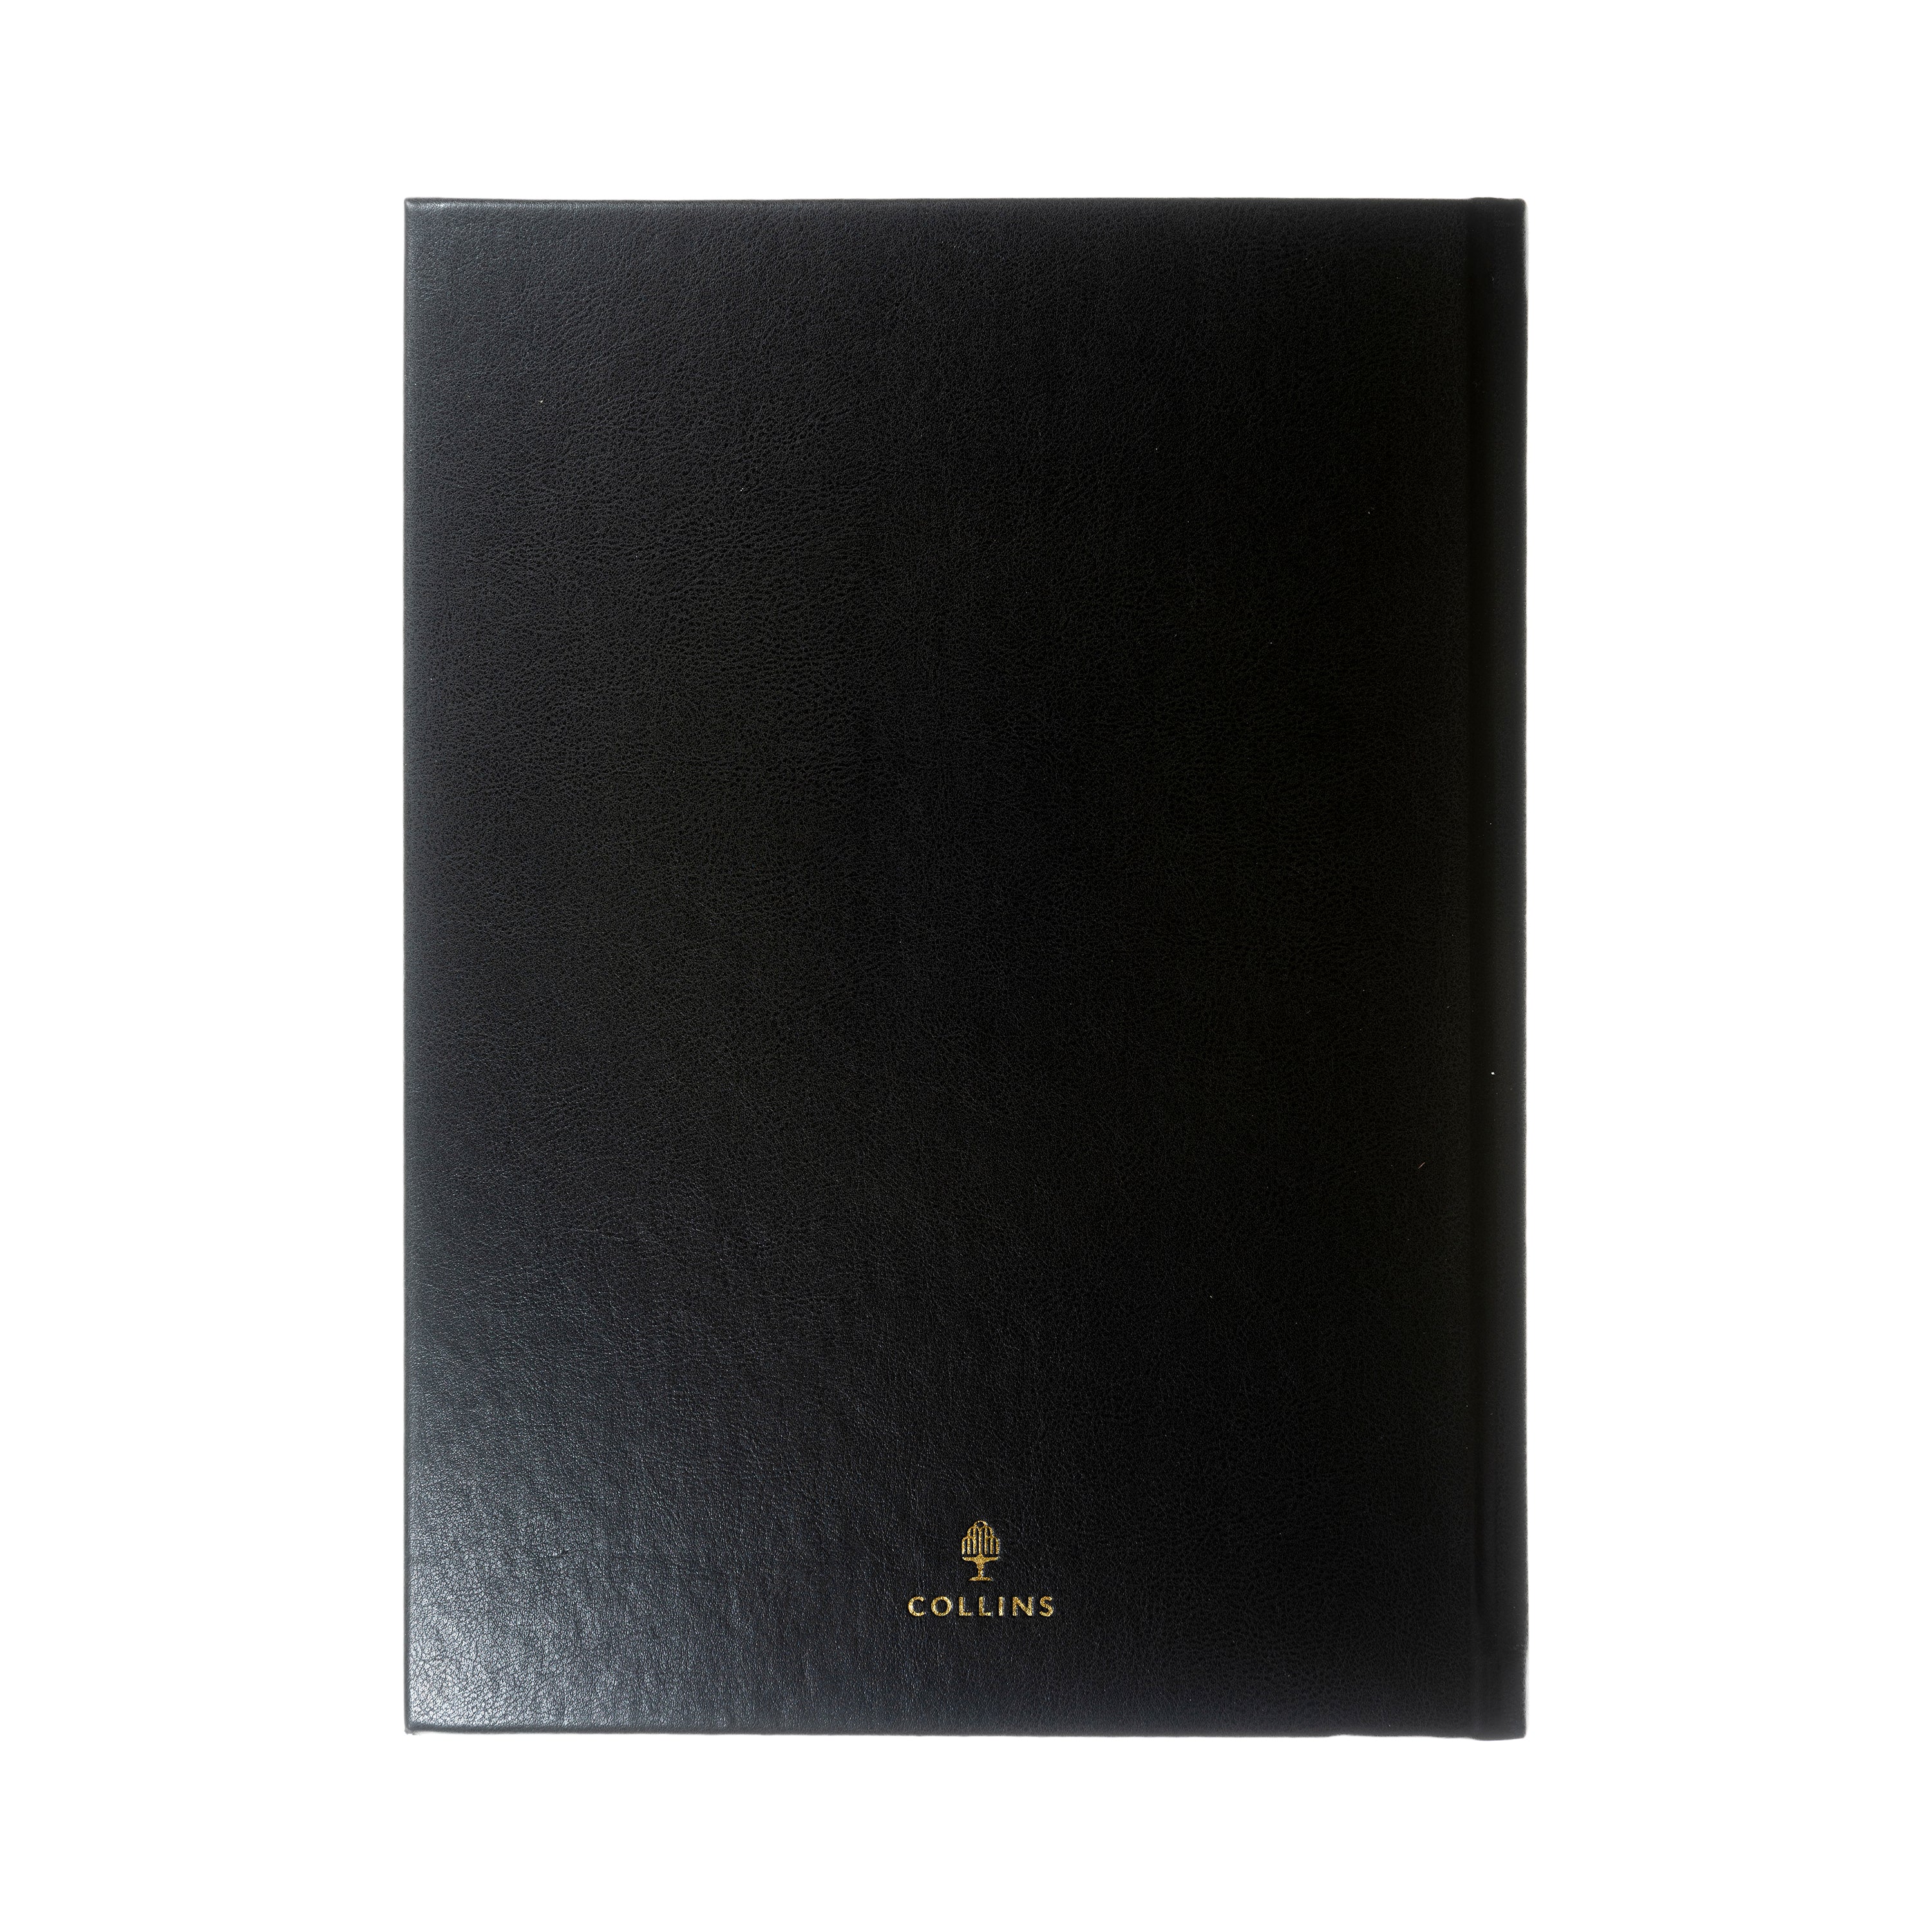 Classic 2024 Diary - Week to View (Vertical), Size Manager